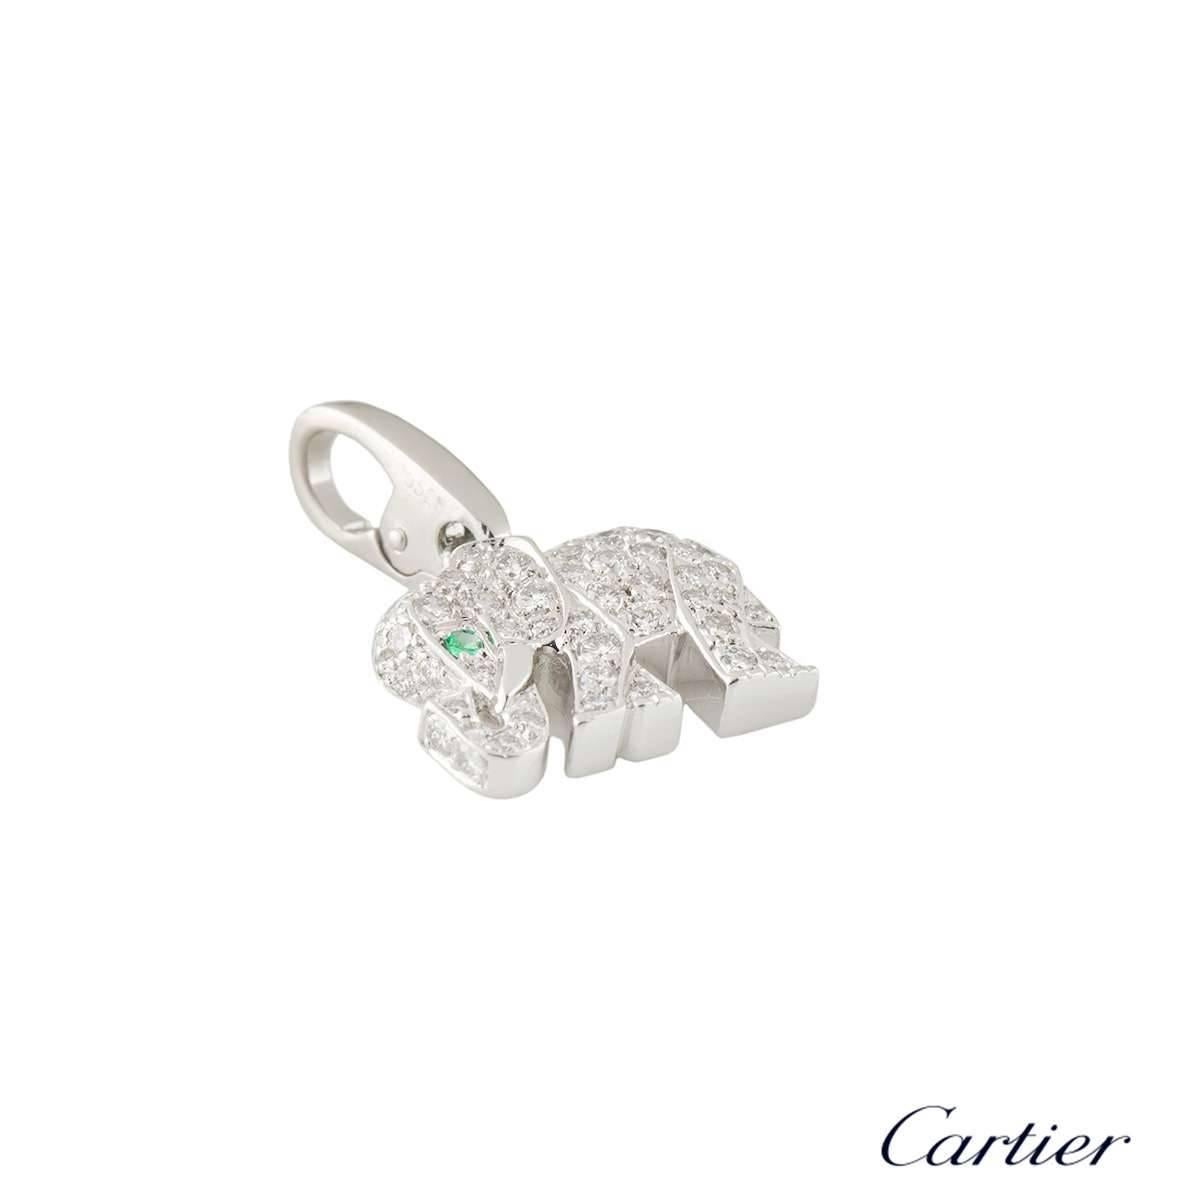 A sparkly 18k white gold diamond Cartier charm. The charm comprises of an elephant motif encrusted with 60 round brilliant cut diamonds with a total weight of approximately 0.40ct, G colour and VS clarity. The charm has a round cut emerald which